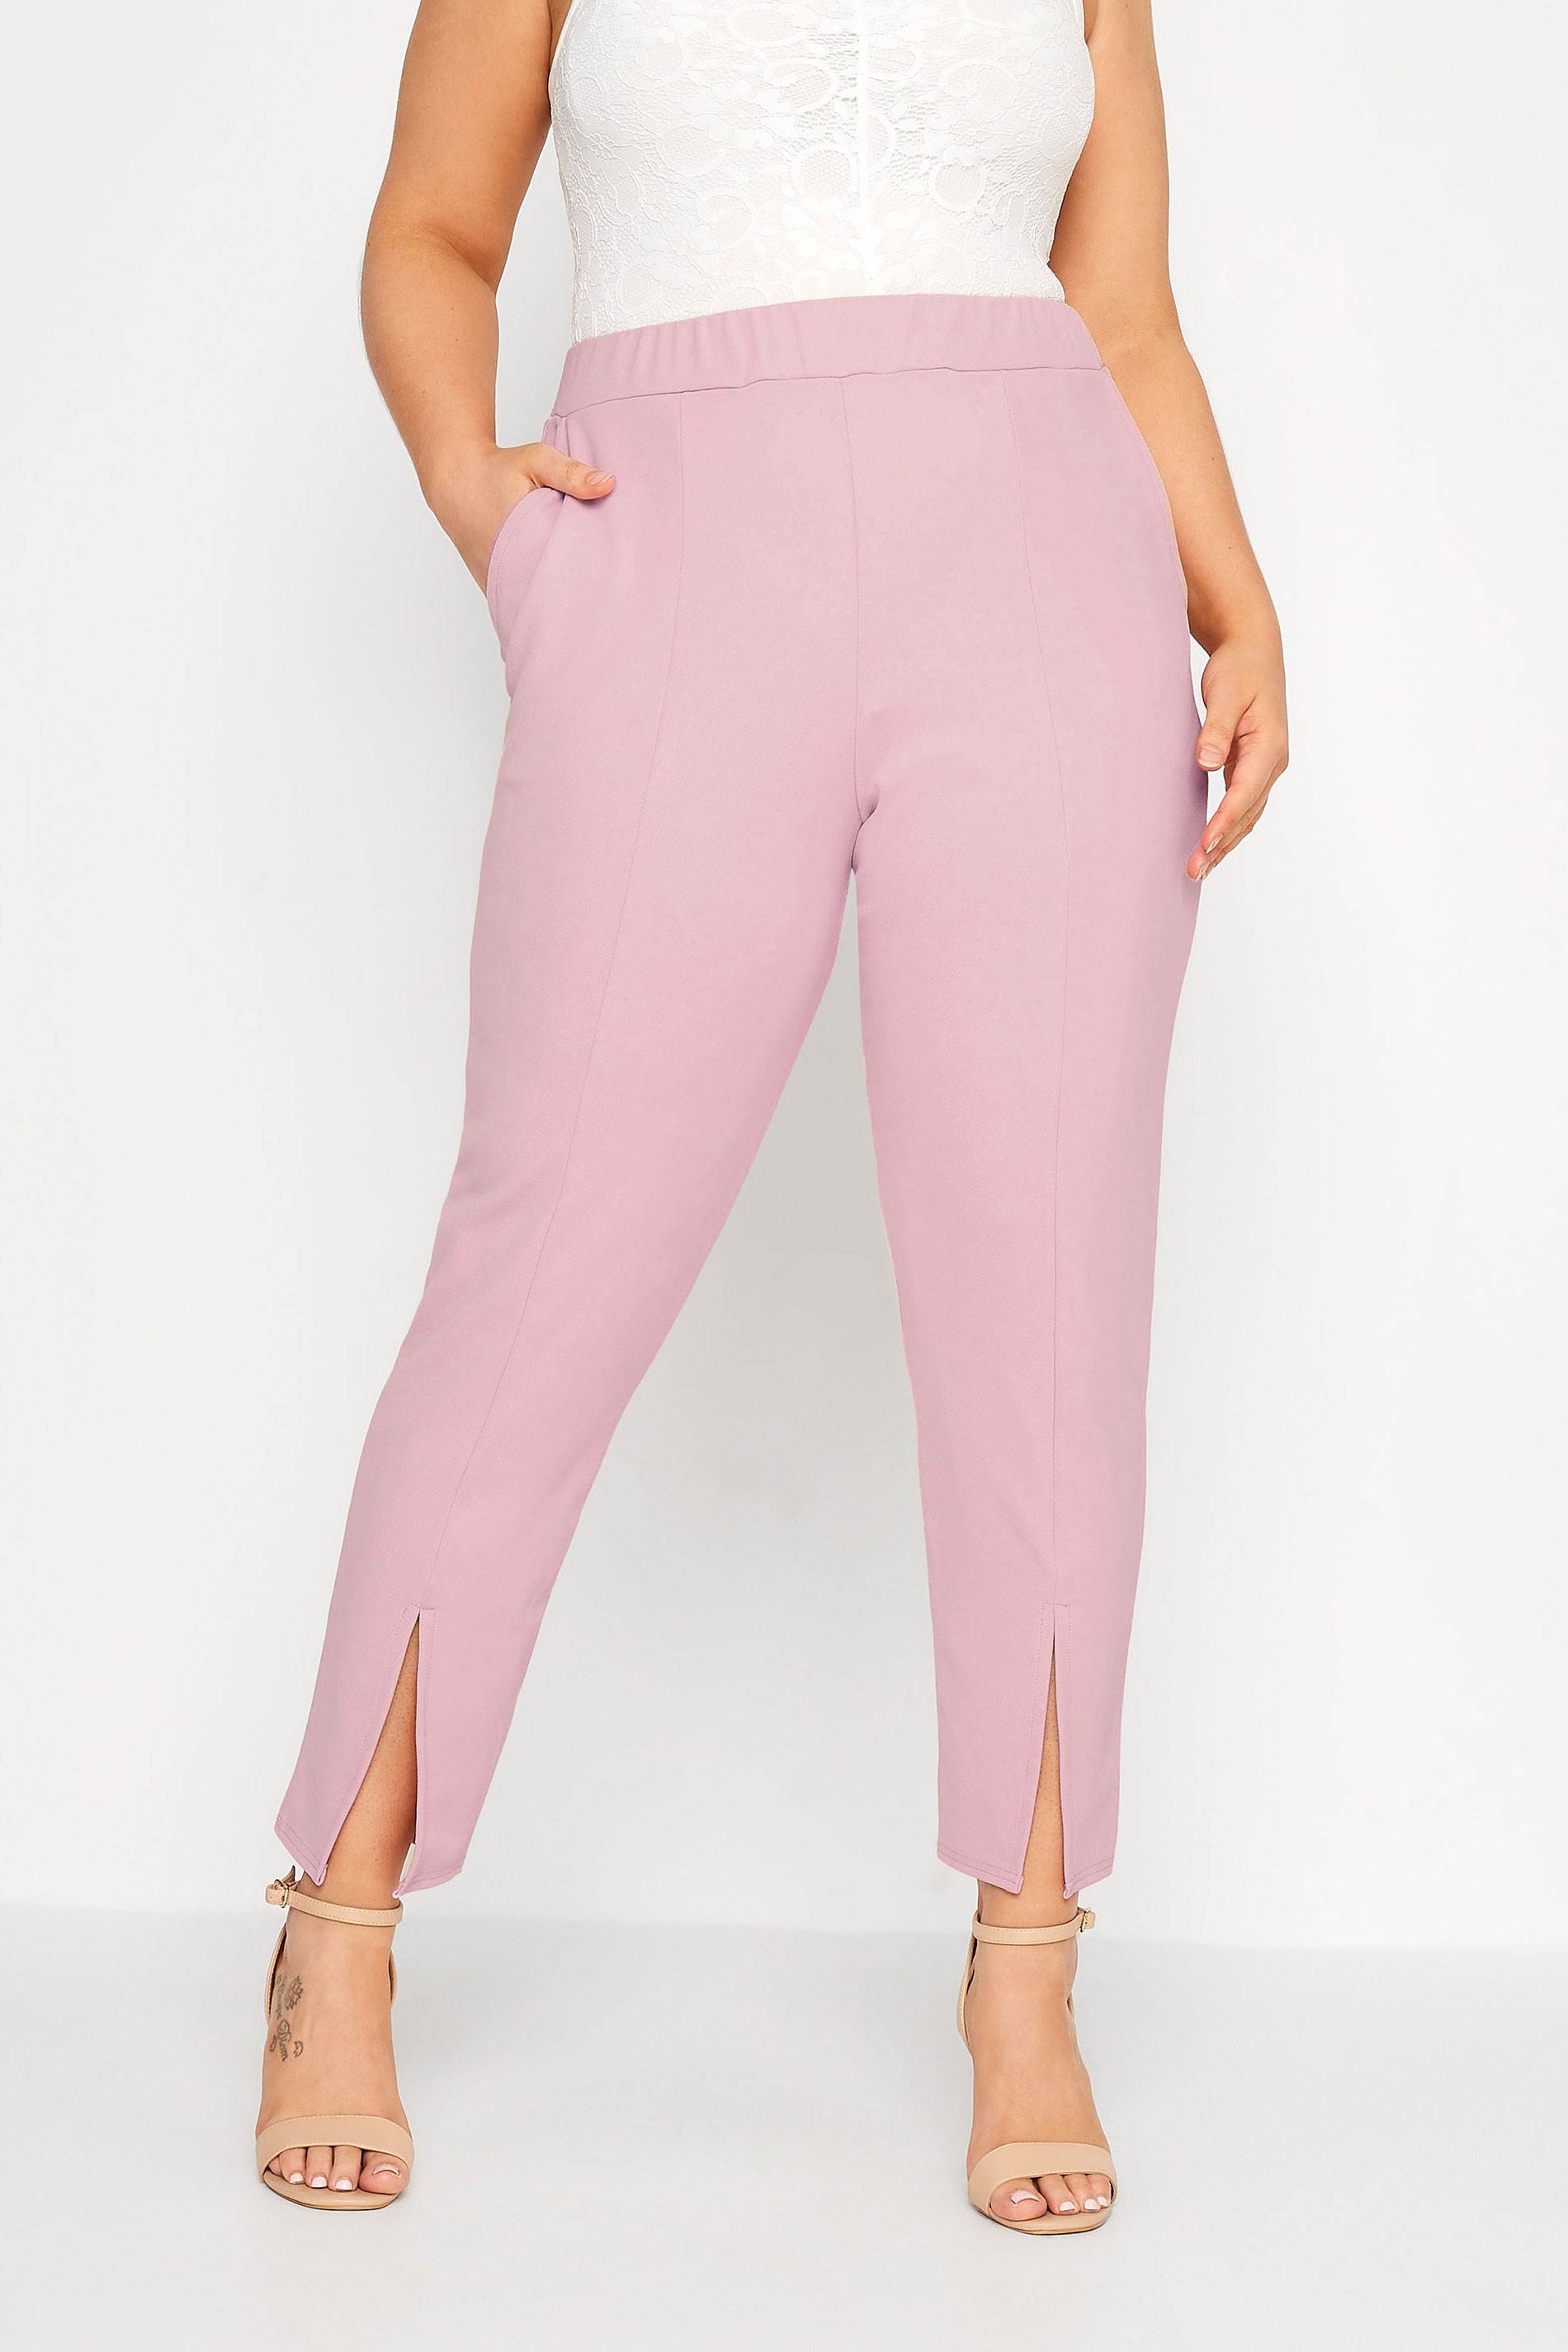 LIMITED COLLECTION Curve Dusky Pink Split Hem Tapered Trousers_A.jpg